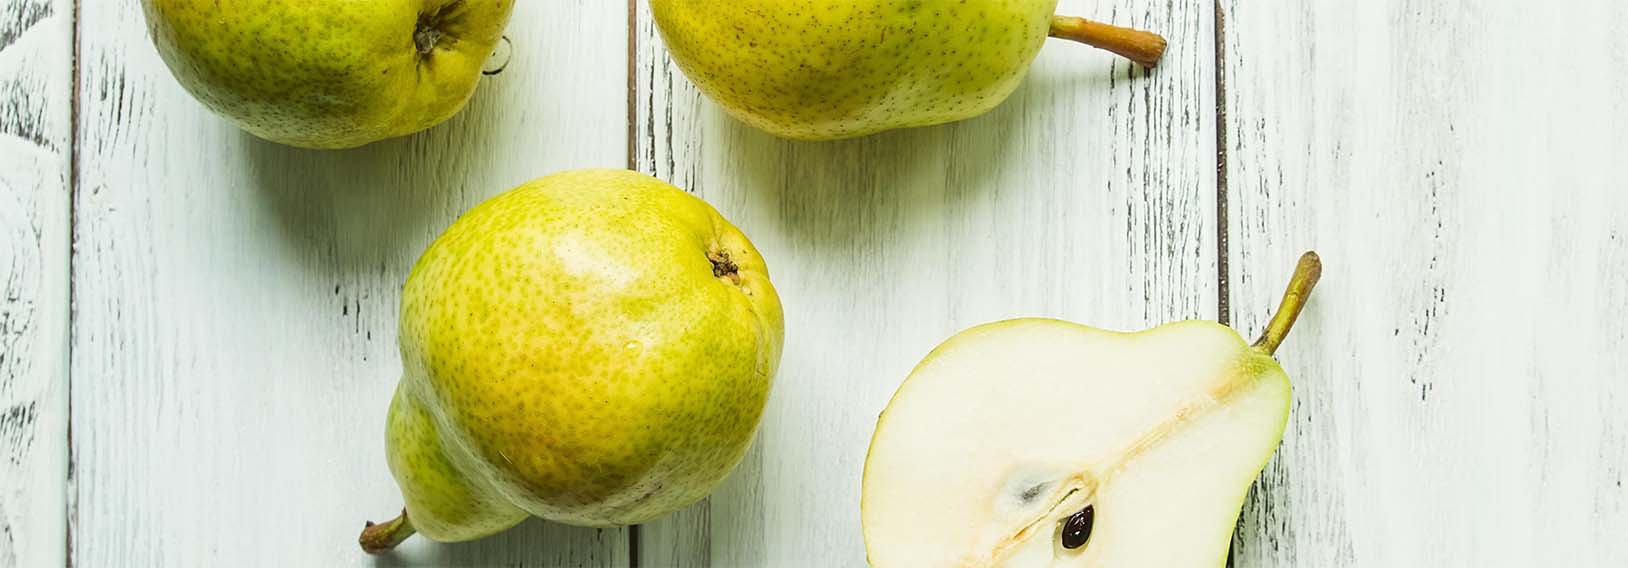 health benefits of pears 